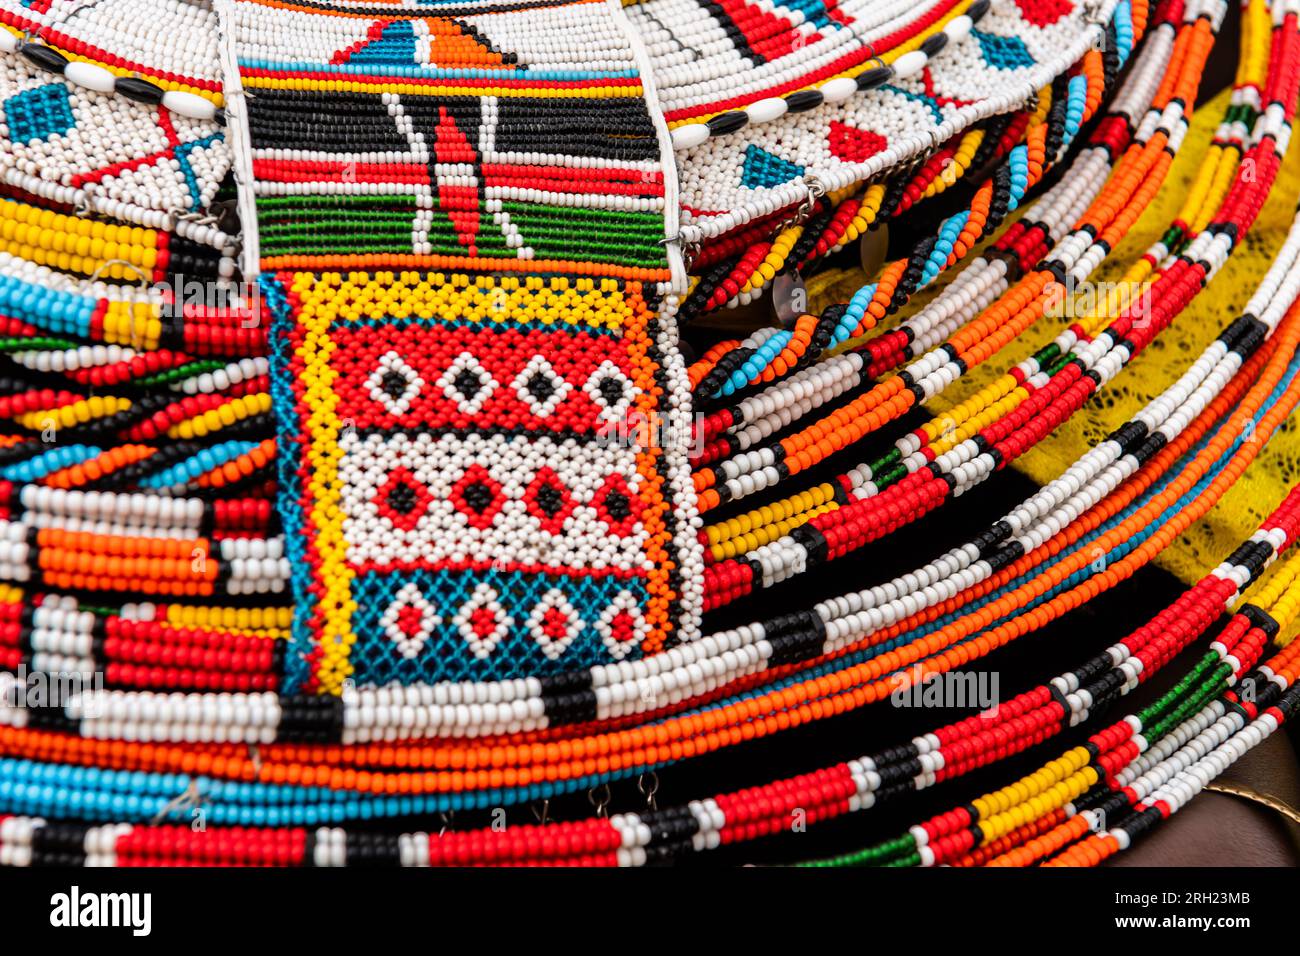 Women by the Samburu tribe use as sophisticated ornaments bracelets and collars made by made by themselves from multicolored beads. Kenya, Africa. Stock Photo